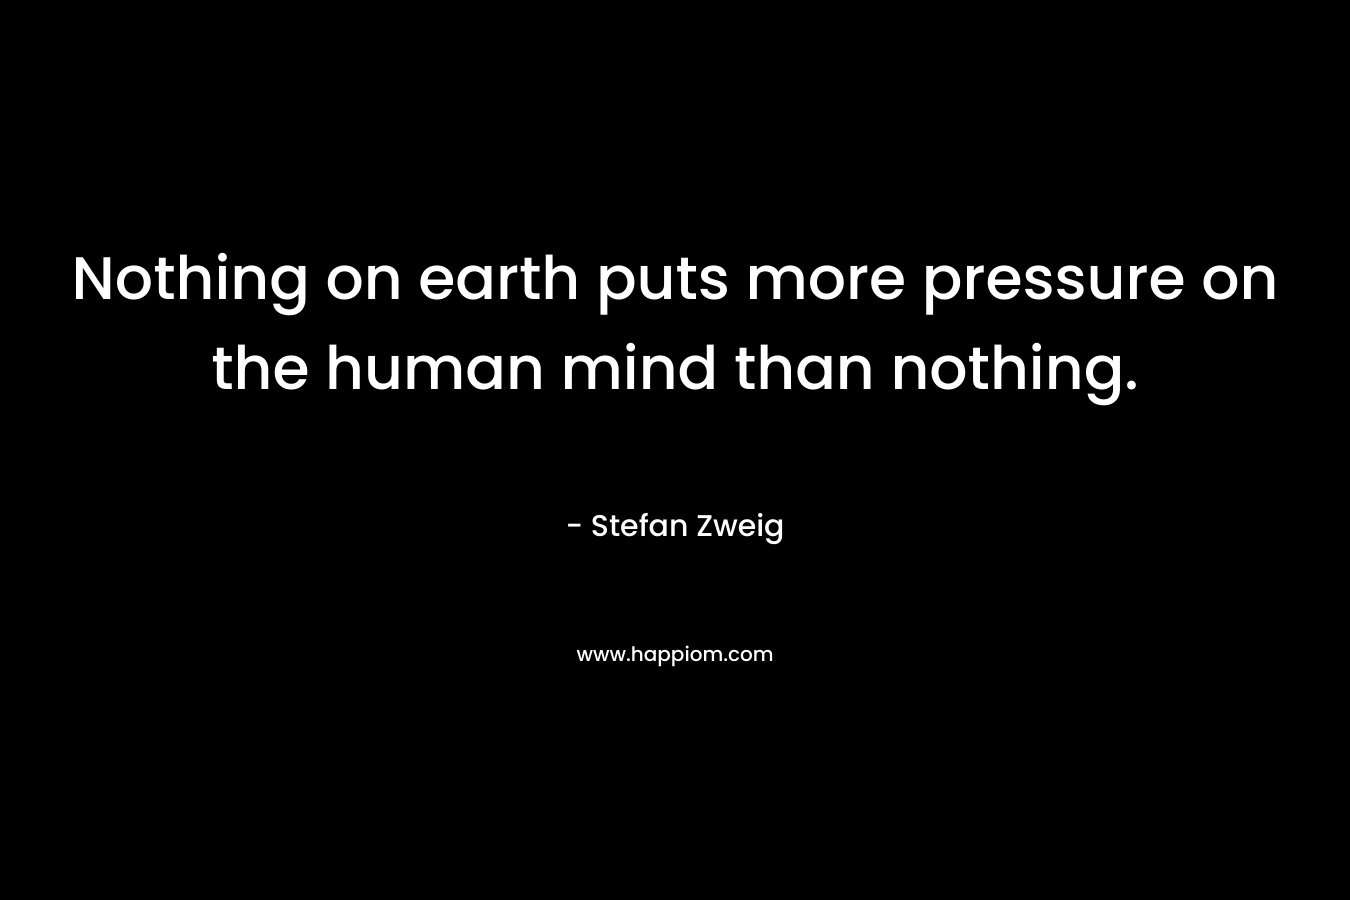 Nothing on earth puts more pressure on the human mind than nothing. – Stefan Zweig